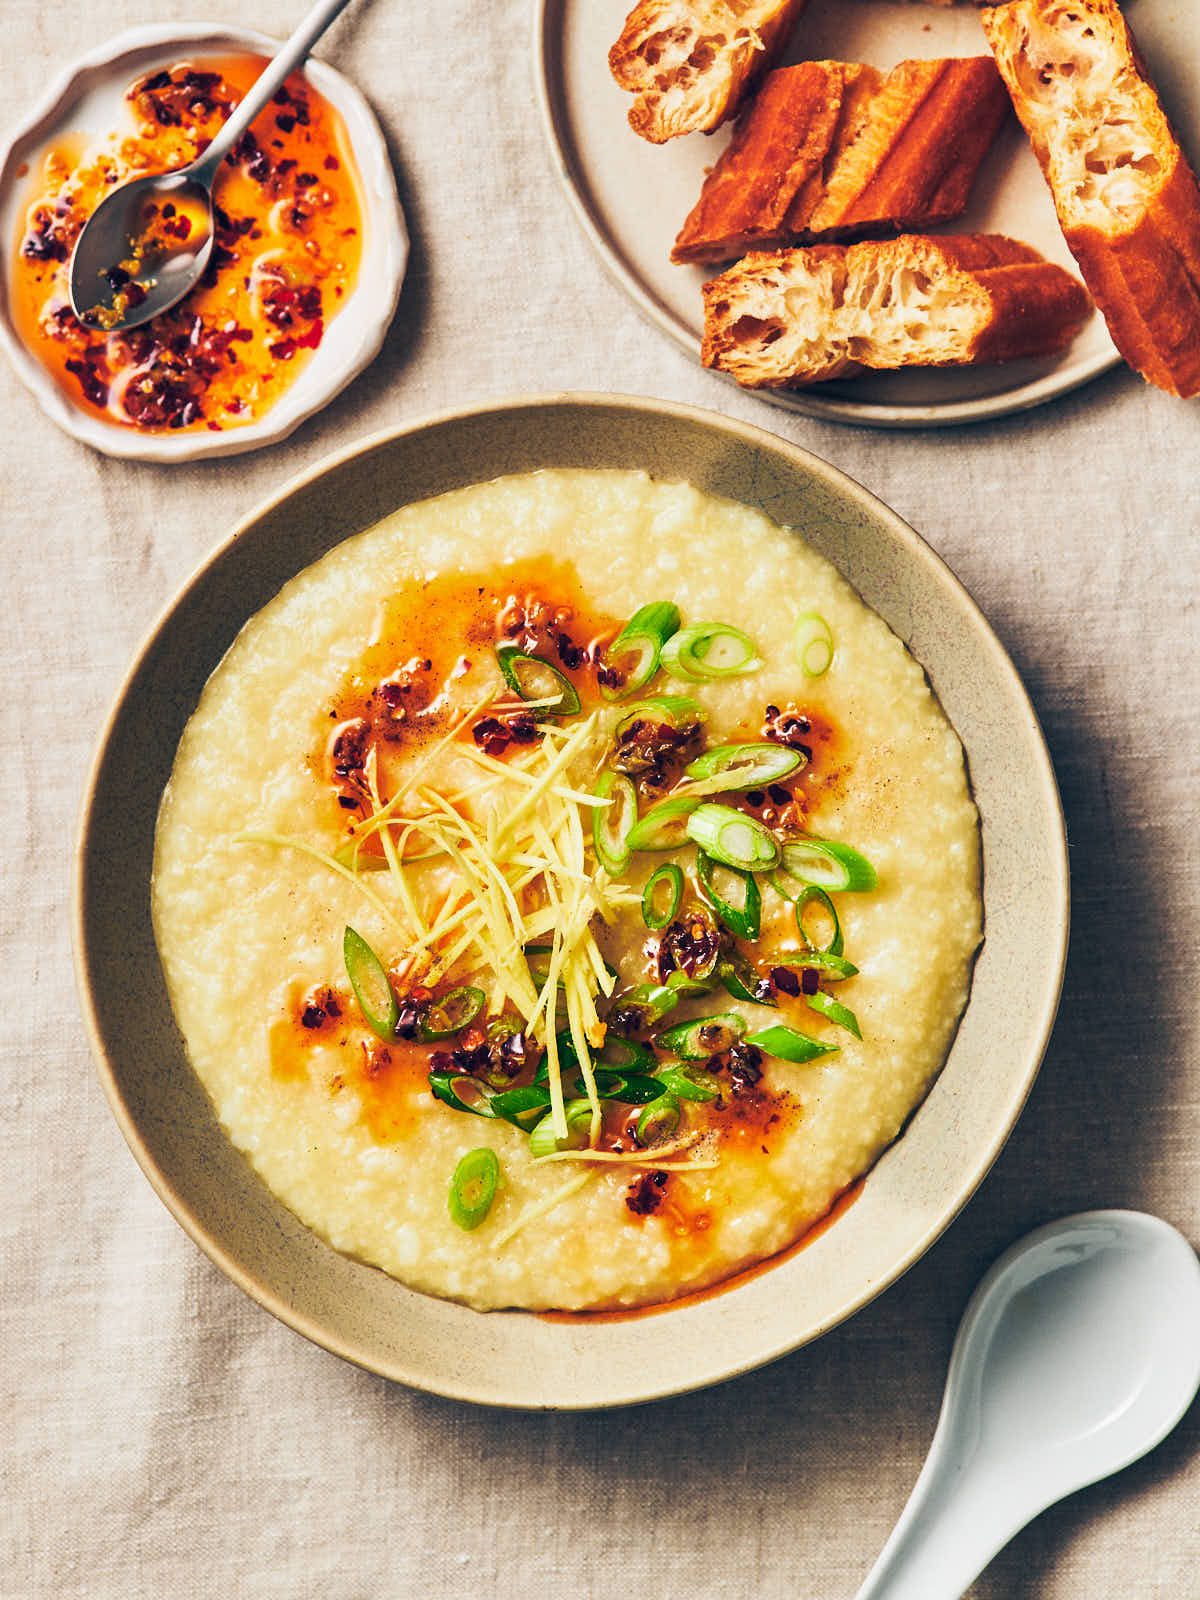 A bowl of vegan congee (rice porridge) topped with chili garlic oil, ginger, and scallions sitting on a table, next to a small plate of Chinese doughnut (Youtiao).